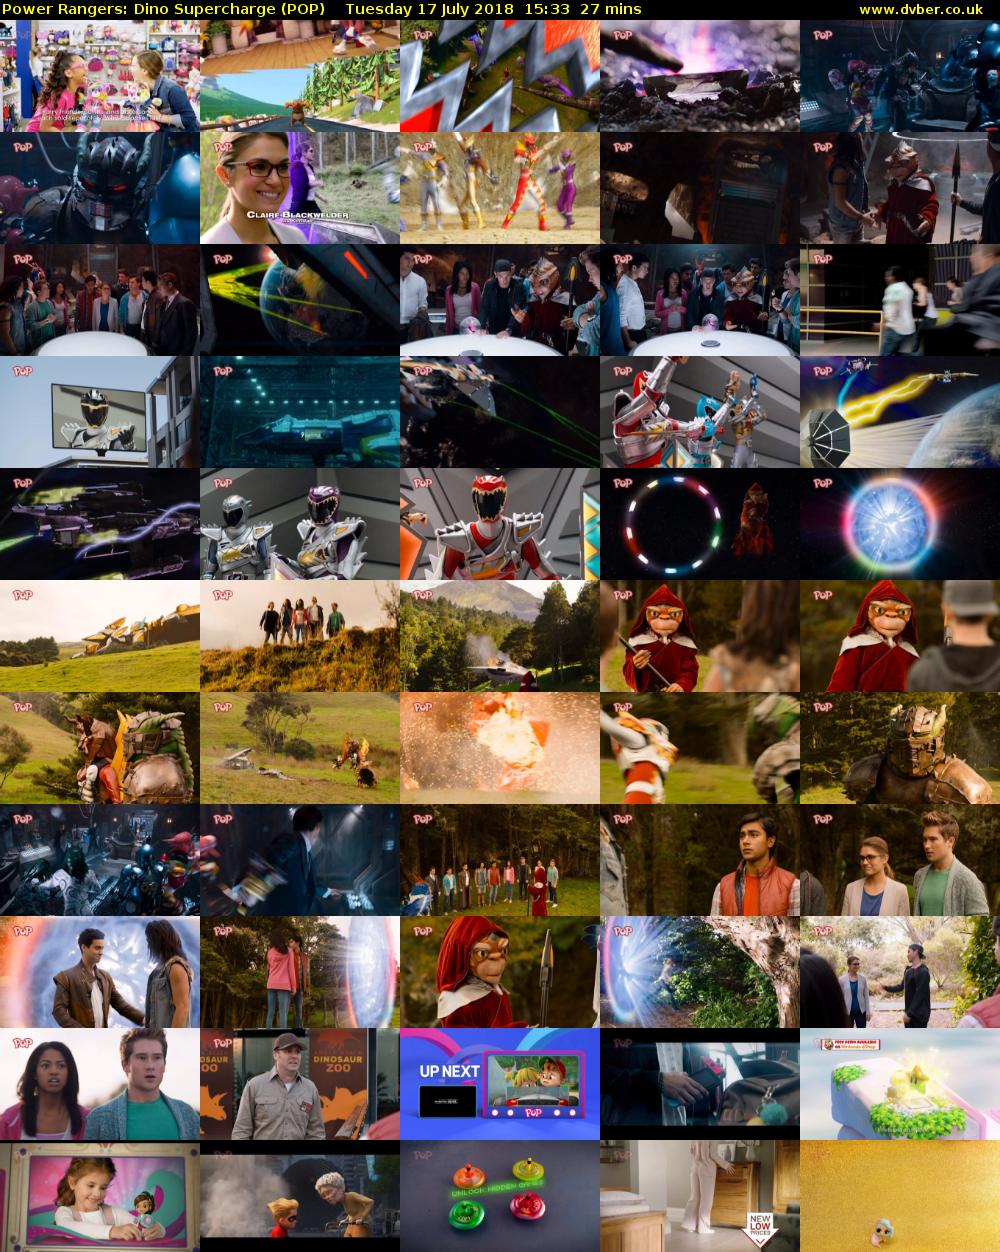 Power Rangers: Dino Supercharge (POP) Tuesday 17 July 2018 15:33 - 16:00